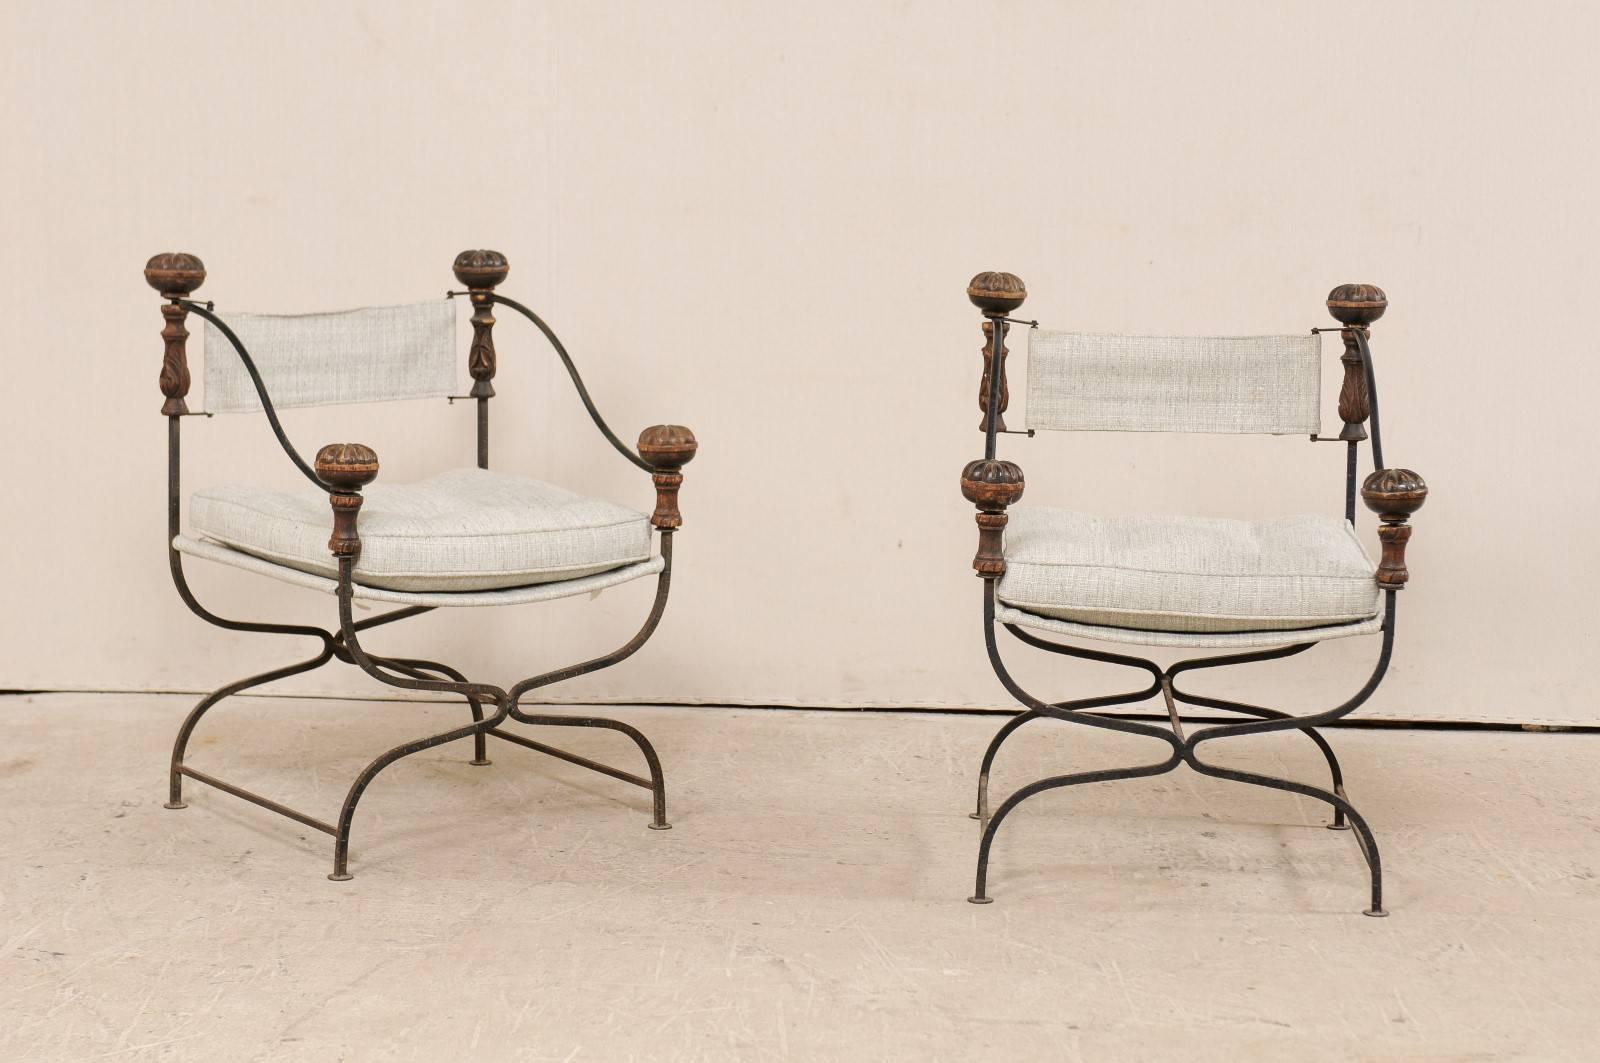 A pair of Italian dante iron and upholstered chairs from the early 20th century. This pair of antique Italian chairs feature signature dante frames, which flow down from their top, connecting inward at their front and back centres, and then curving